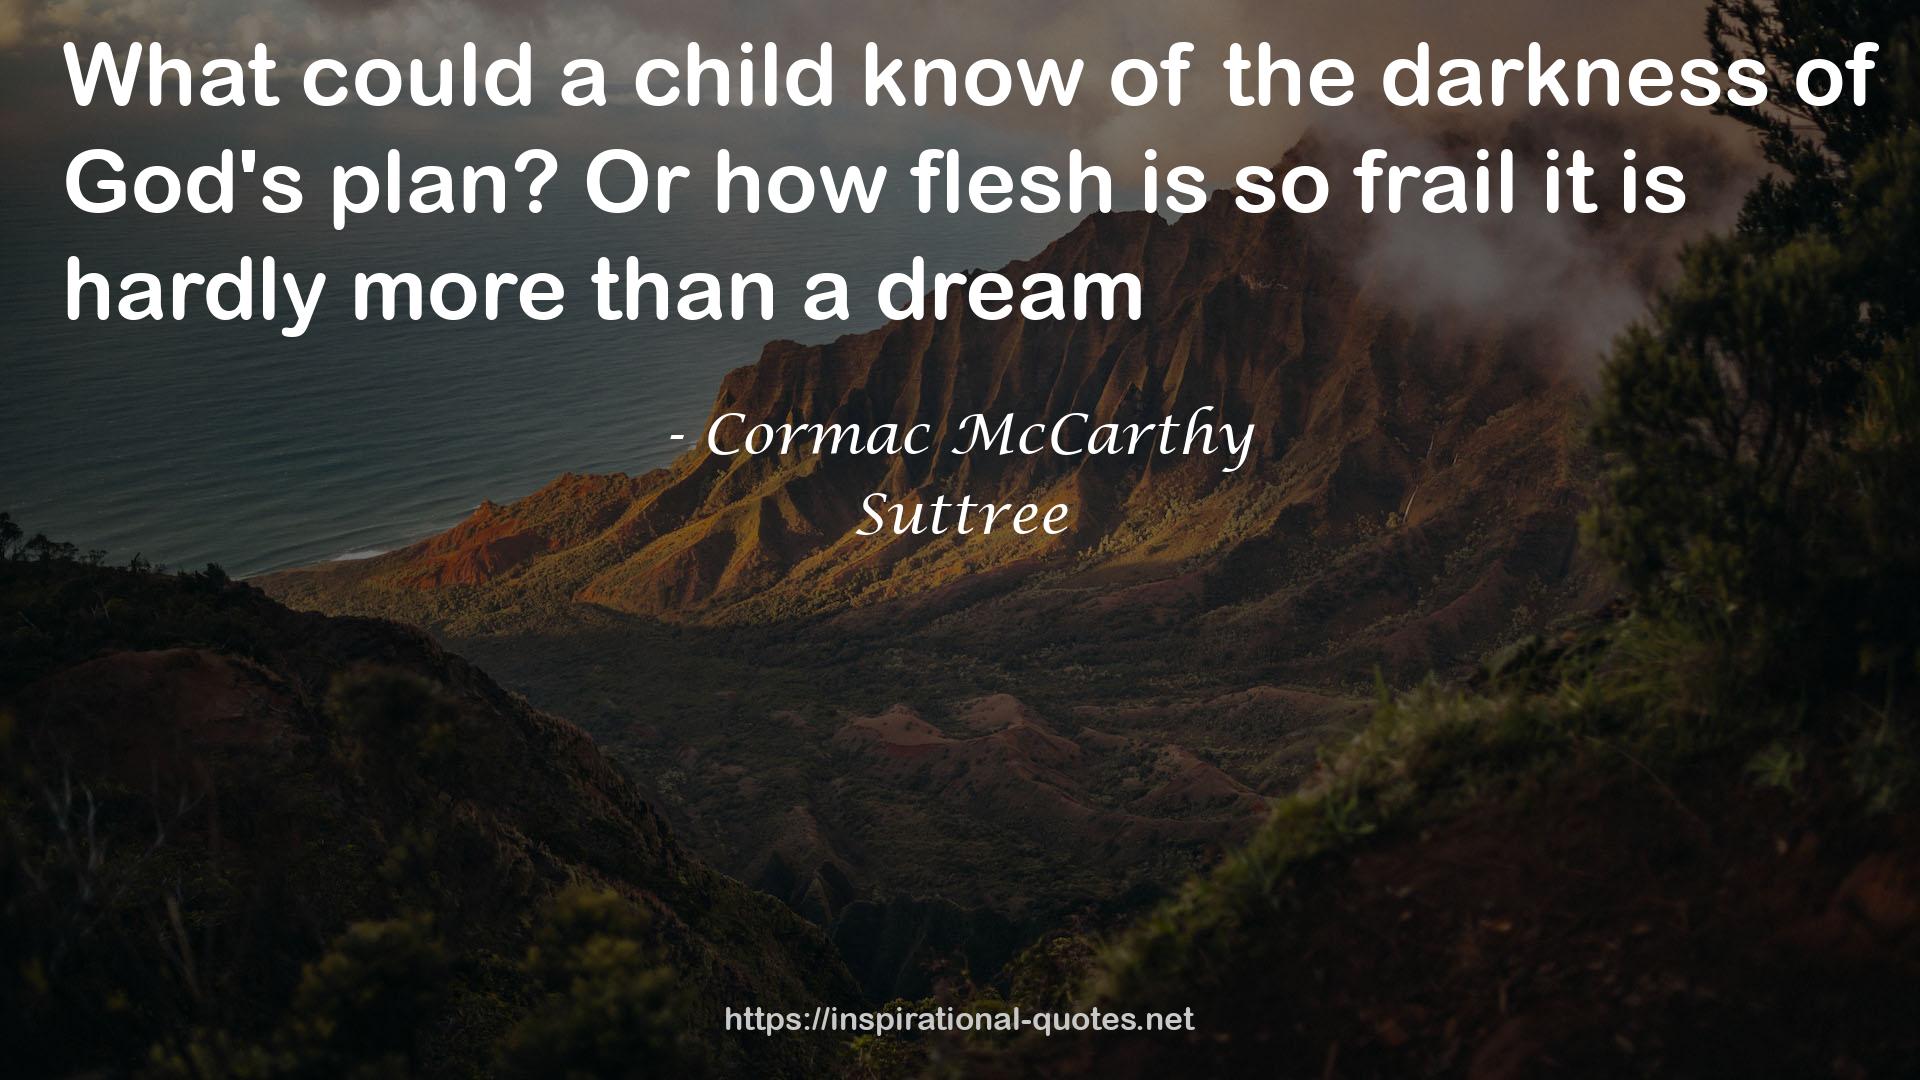 Cormac McCarthy quote : What could a child know of the darkness of God's plan? Or how flesh is so frail it is hardly more than a dream